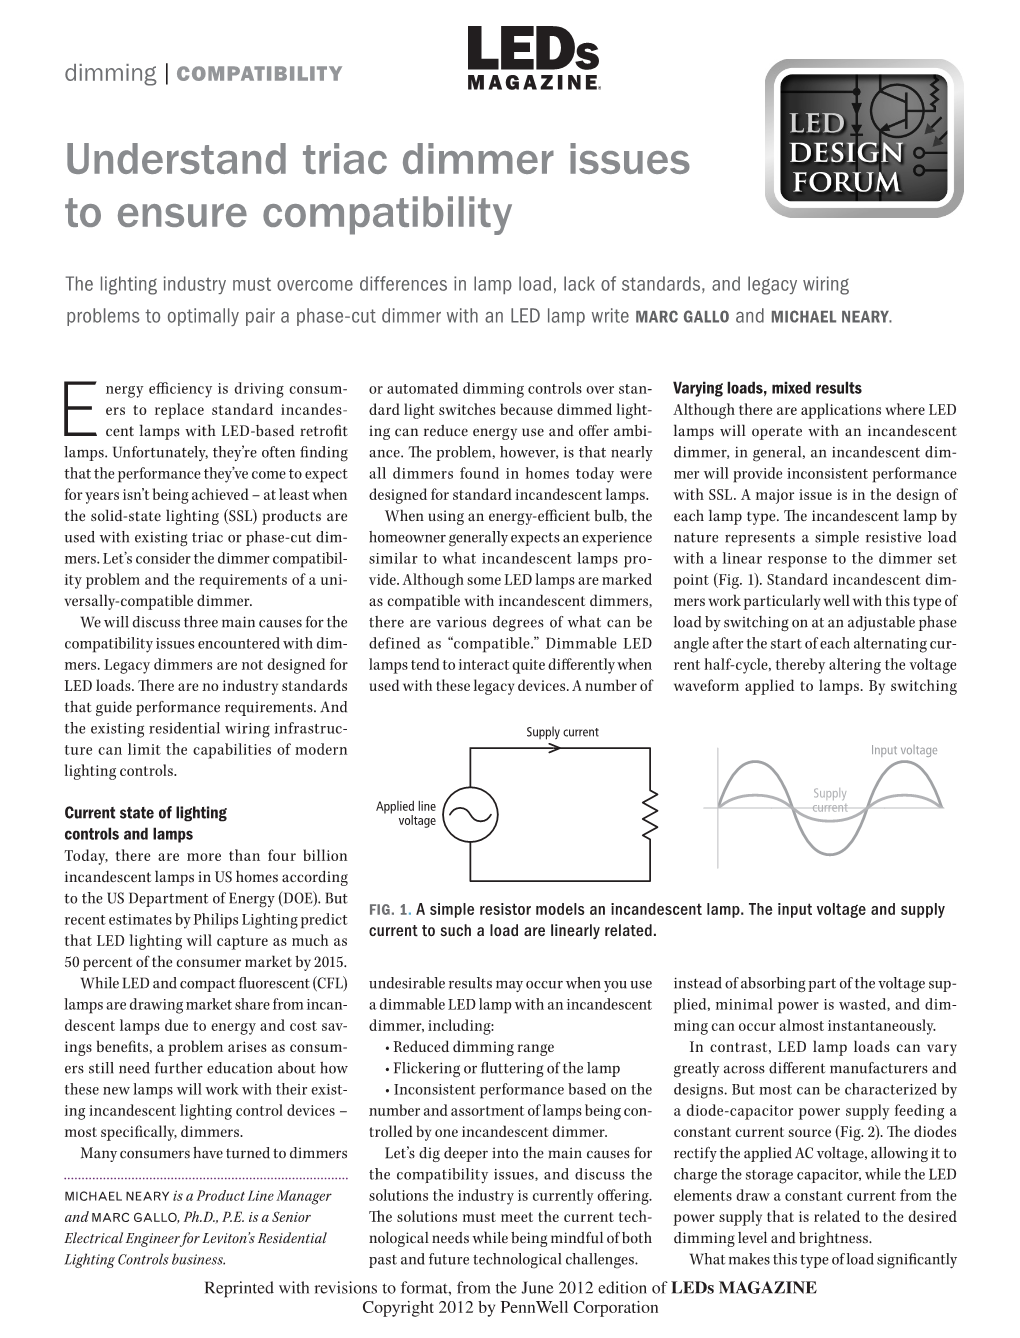 Understand Triac Dimmer Issues to Ensure Compatibility